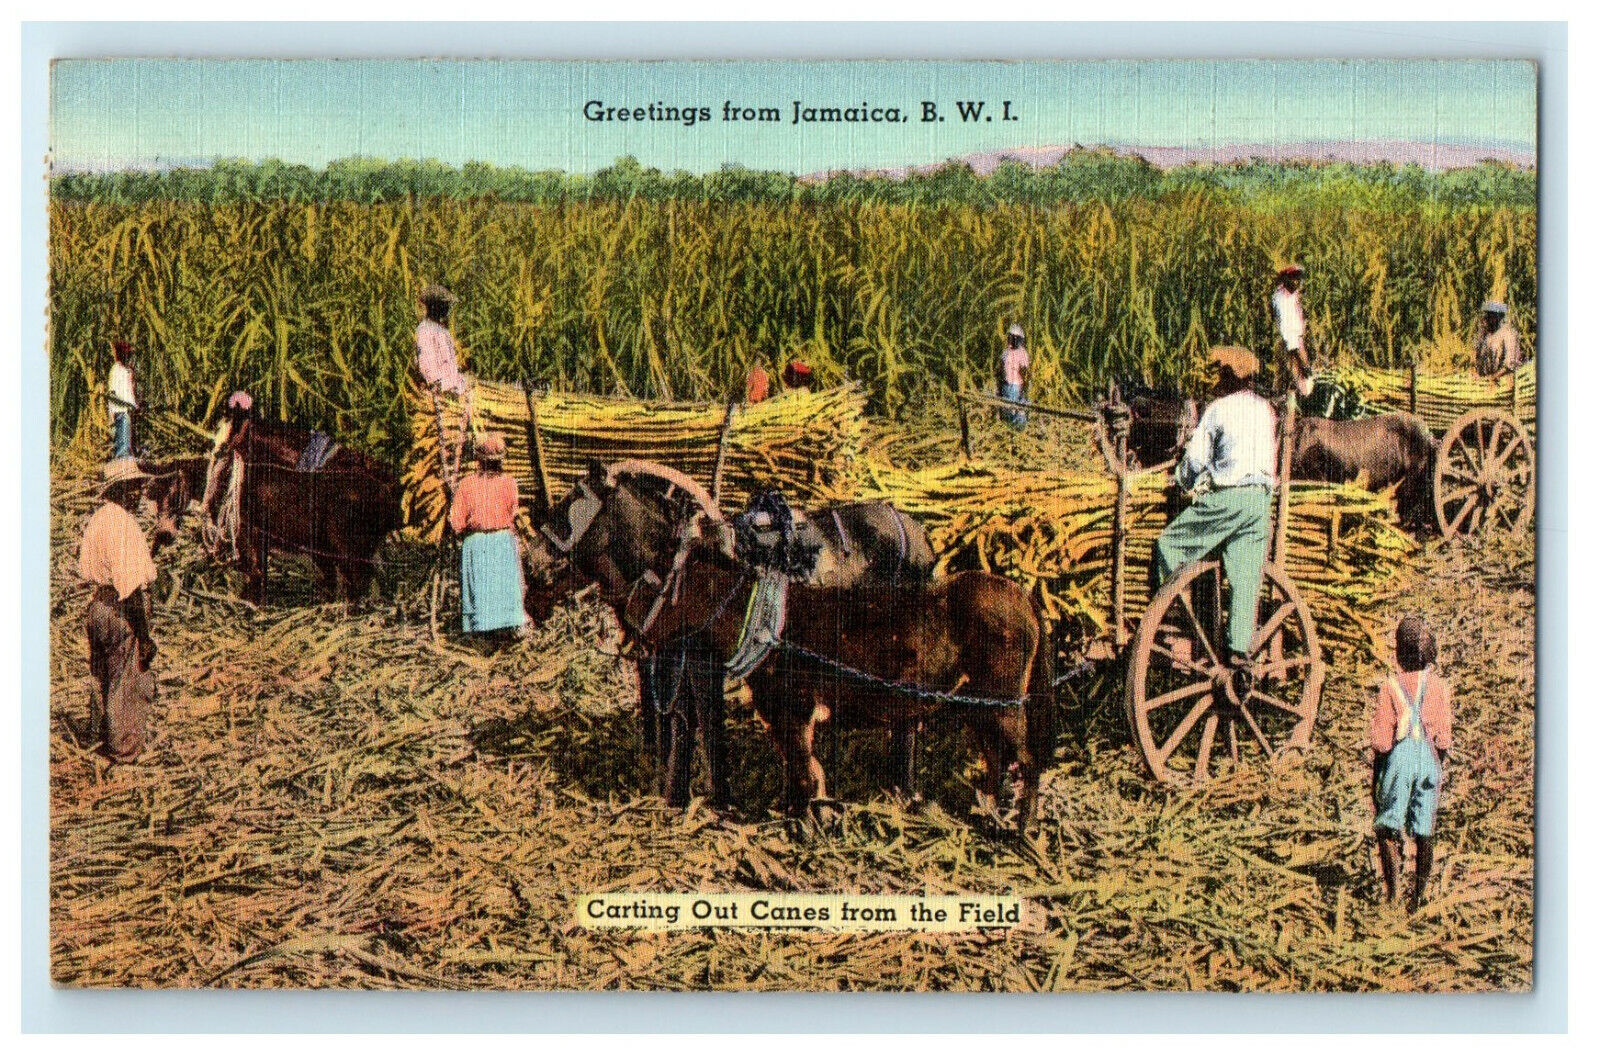 c1950s Carting Out Canes from Field Greetings from Jamaica BWI Postcard